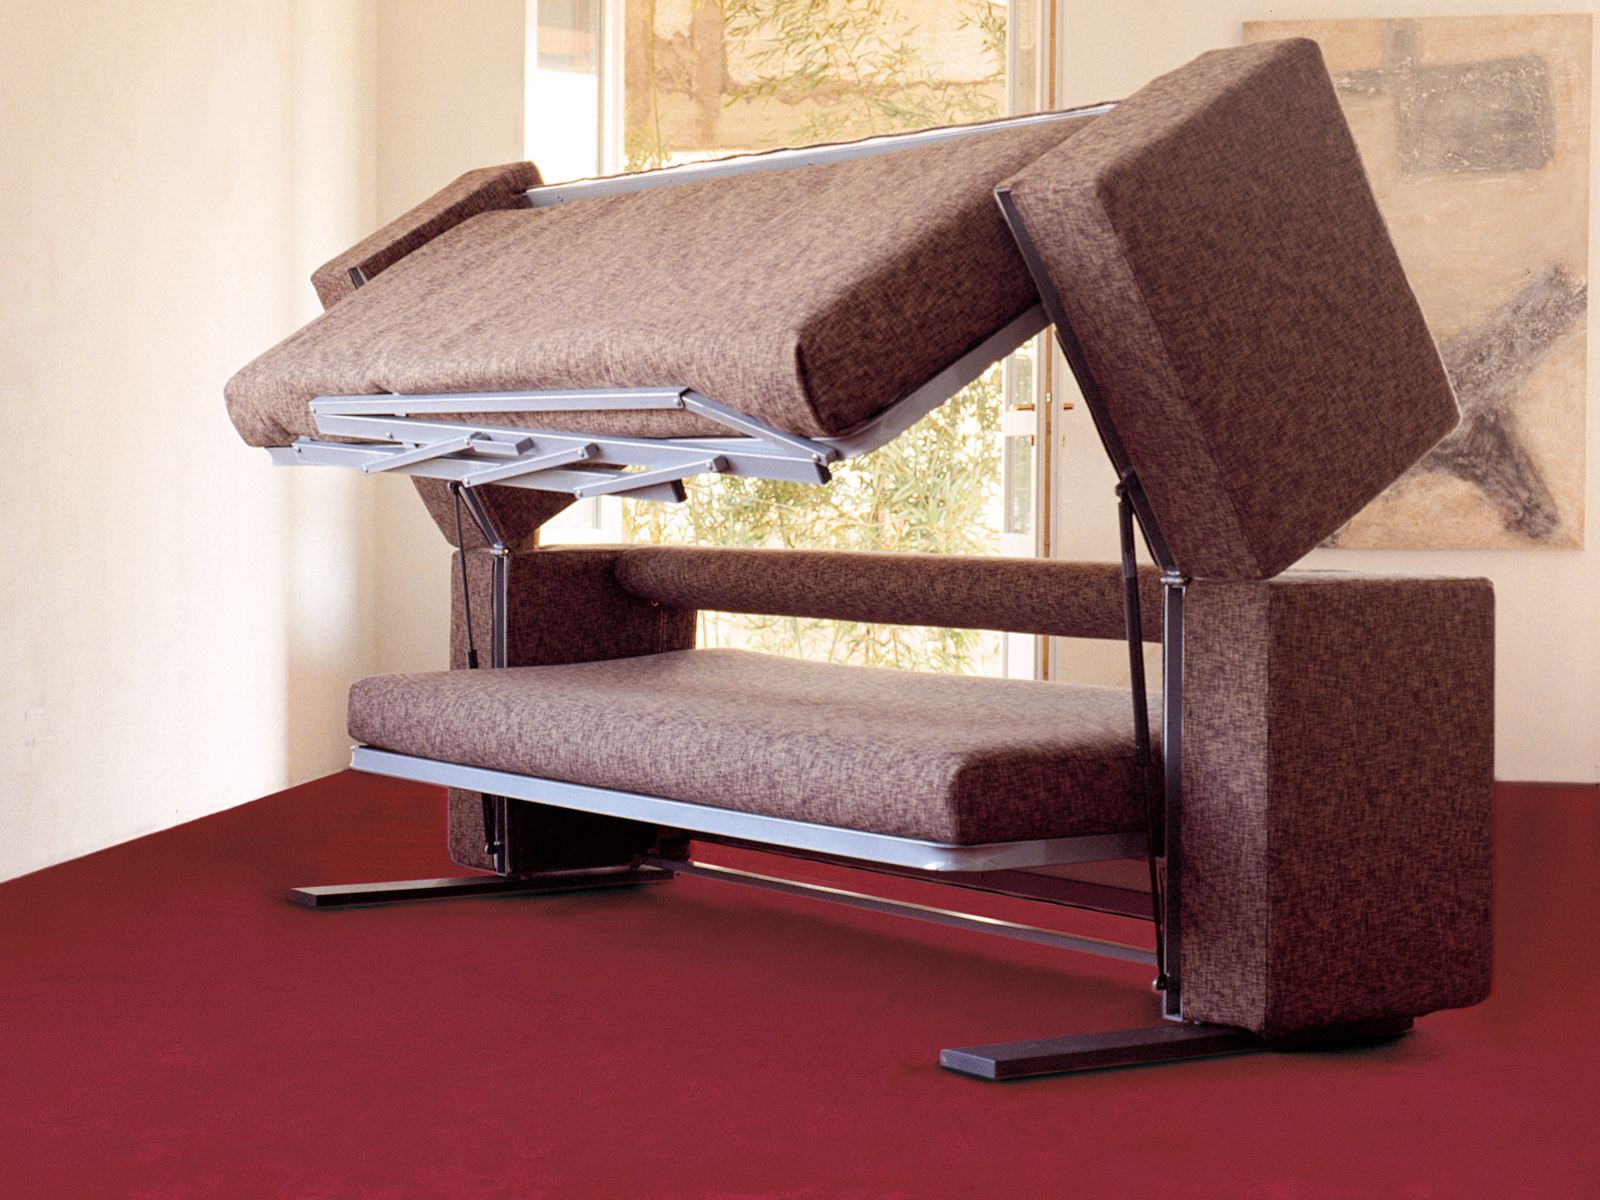 bunk beds that turn into a sofa